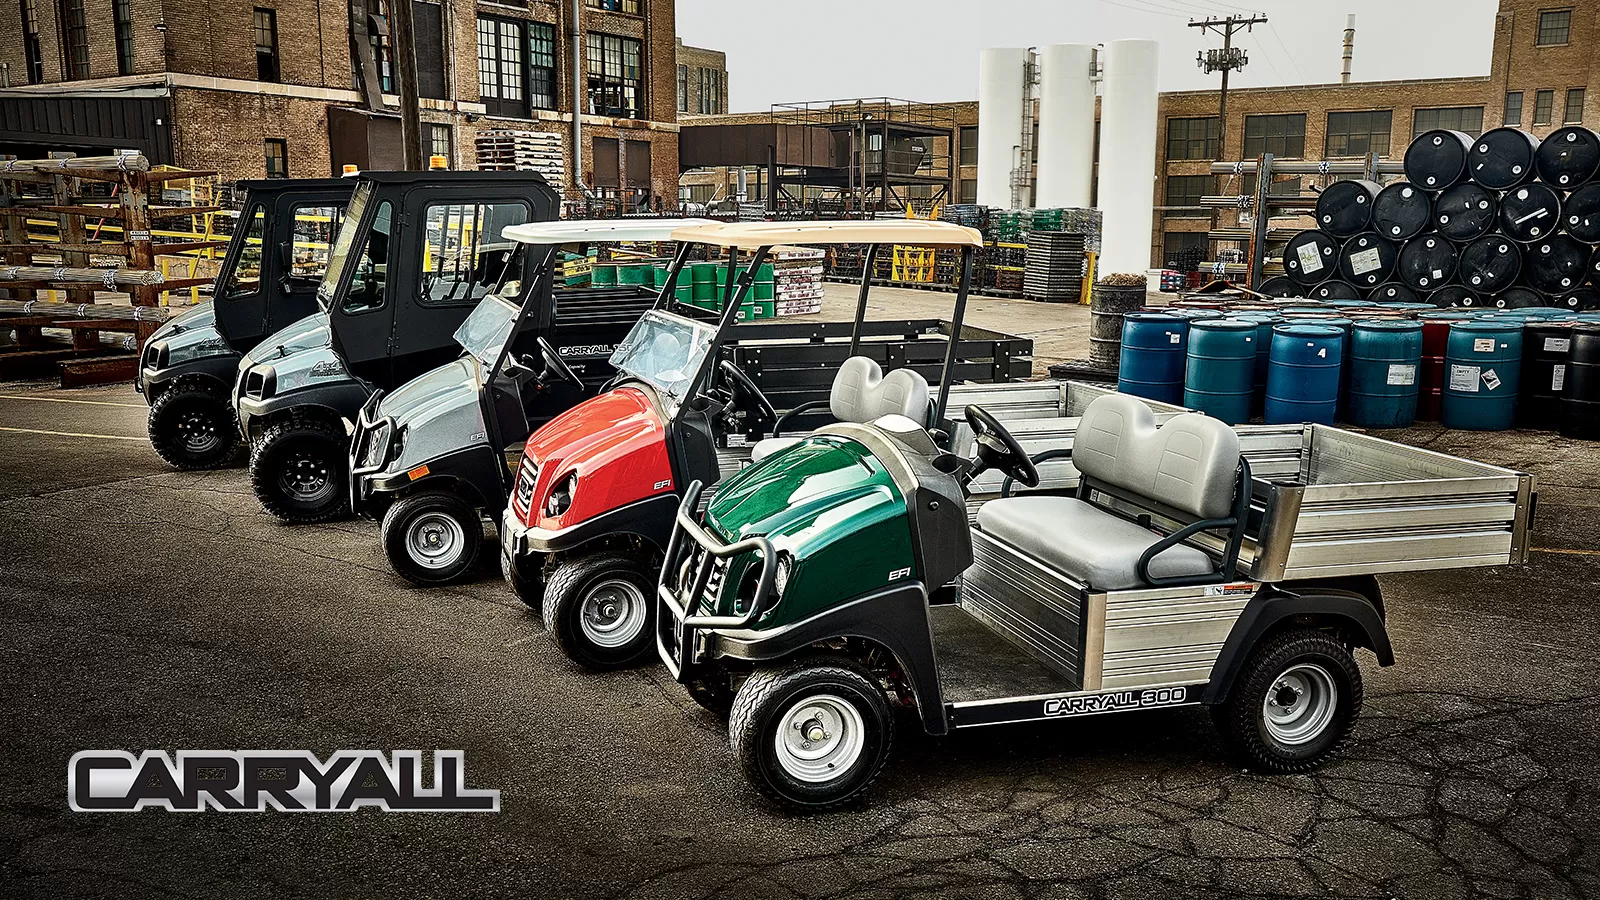 Club Car: The Epitome of Versatility and Reliability